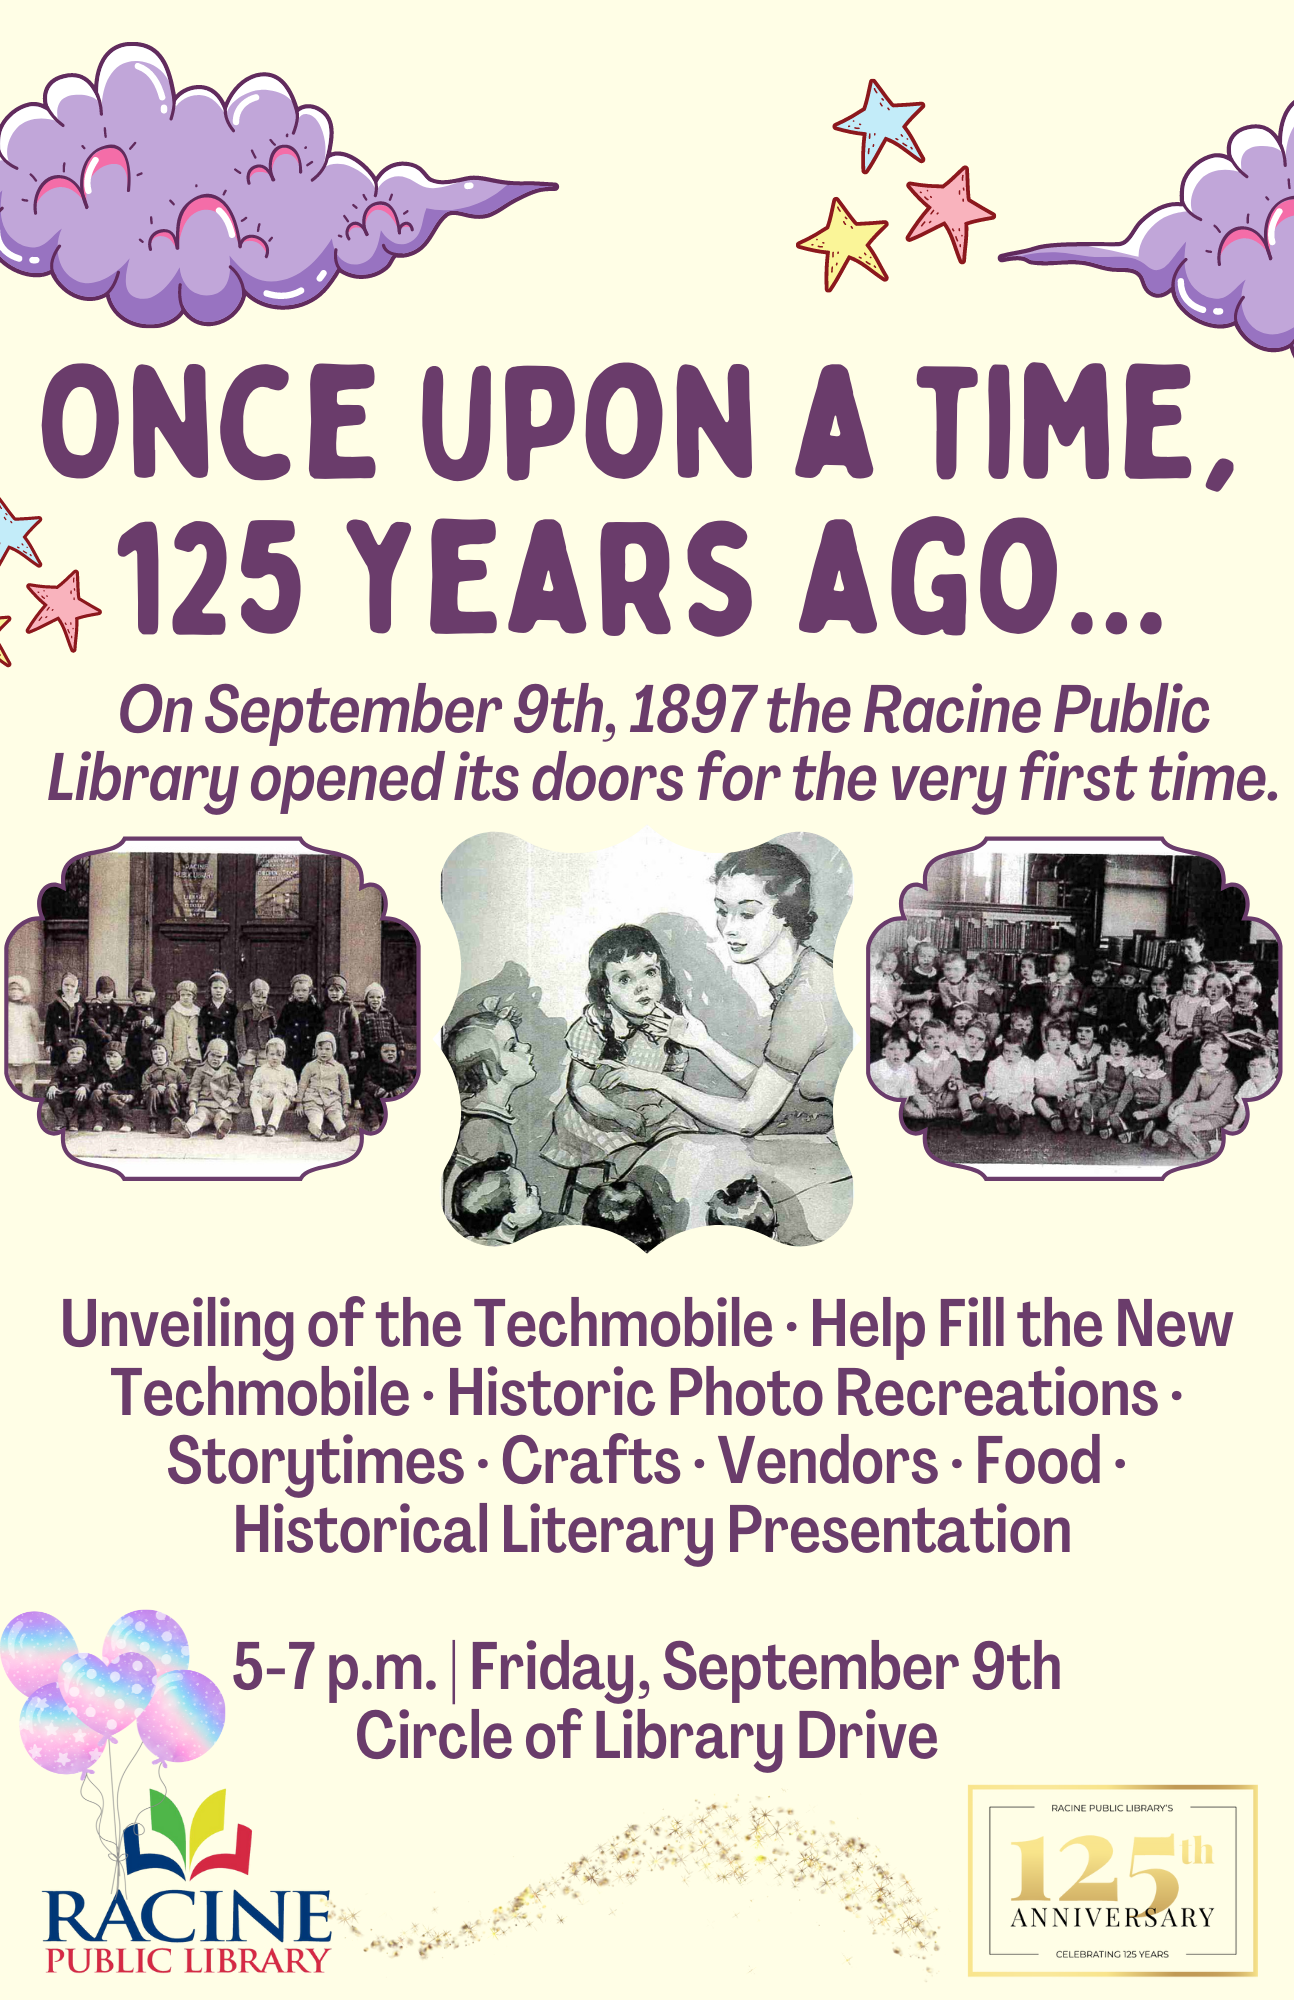 Once Upon a Time, 125 Years Ago... On September 9th, 1897 the Racine Public Library opened its doors for the very first time. Unveiling of the Techmobile. Help fill the new Techmobile. Historic photo recreations. Storytimes. Crafts. Vendors. Food. Historical literary presentation.